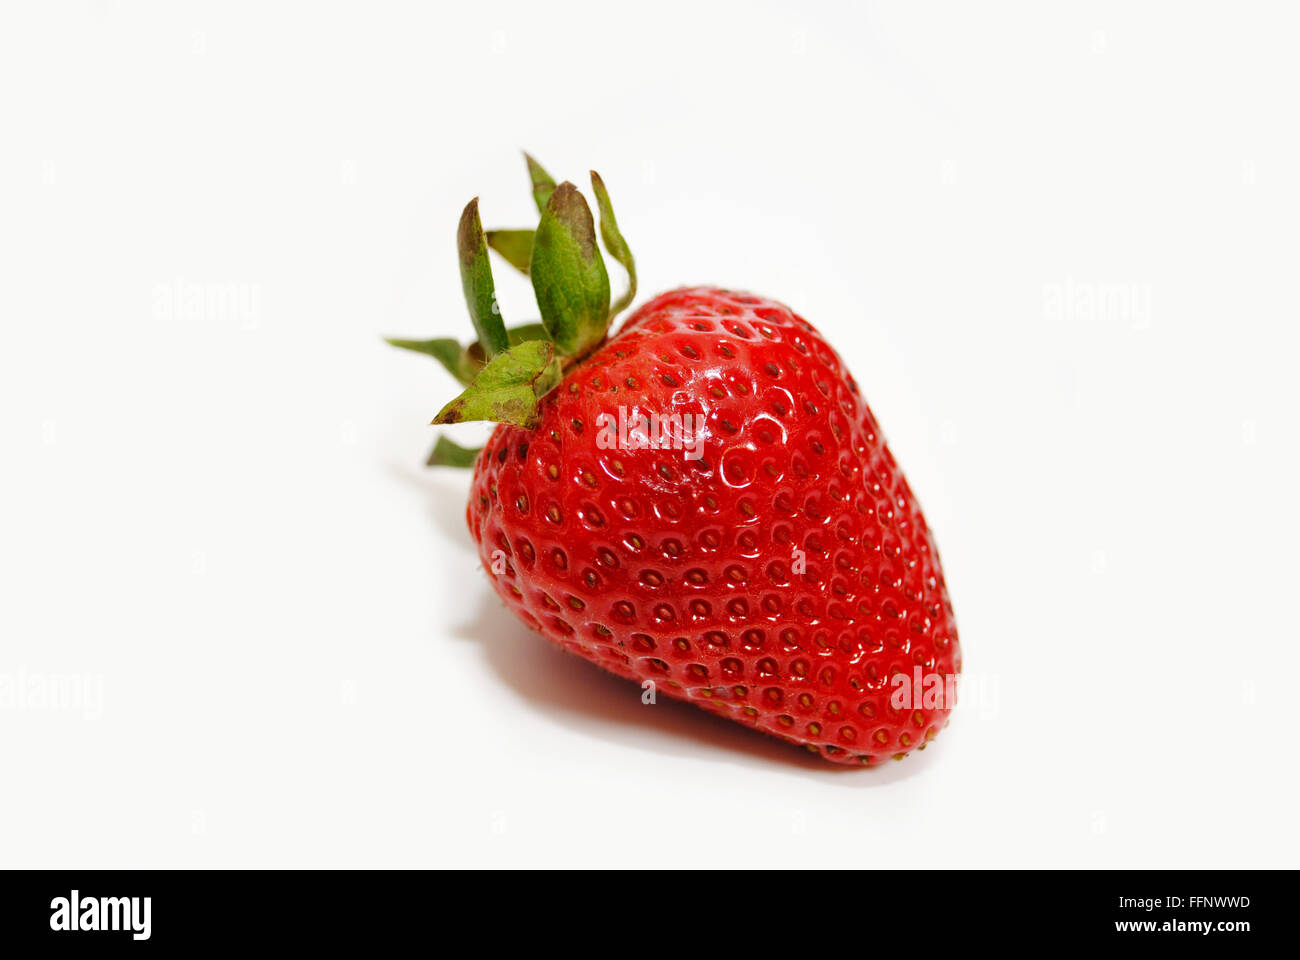 Isolated Ripe Red Strawberry on a White Background Stock Photo